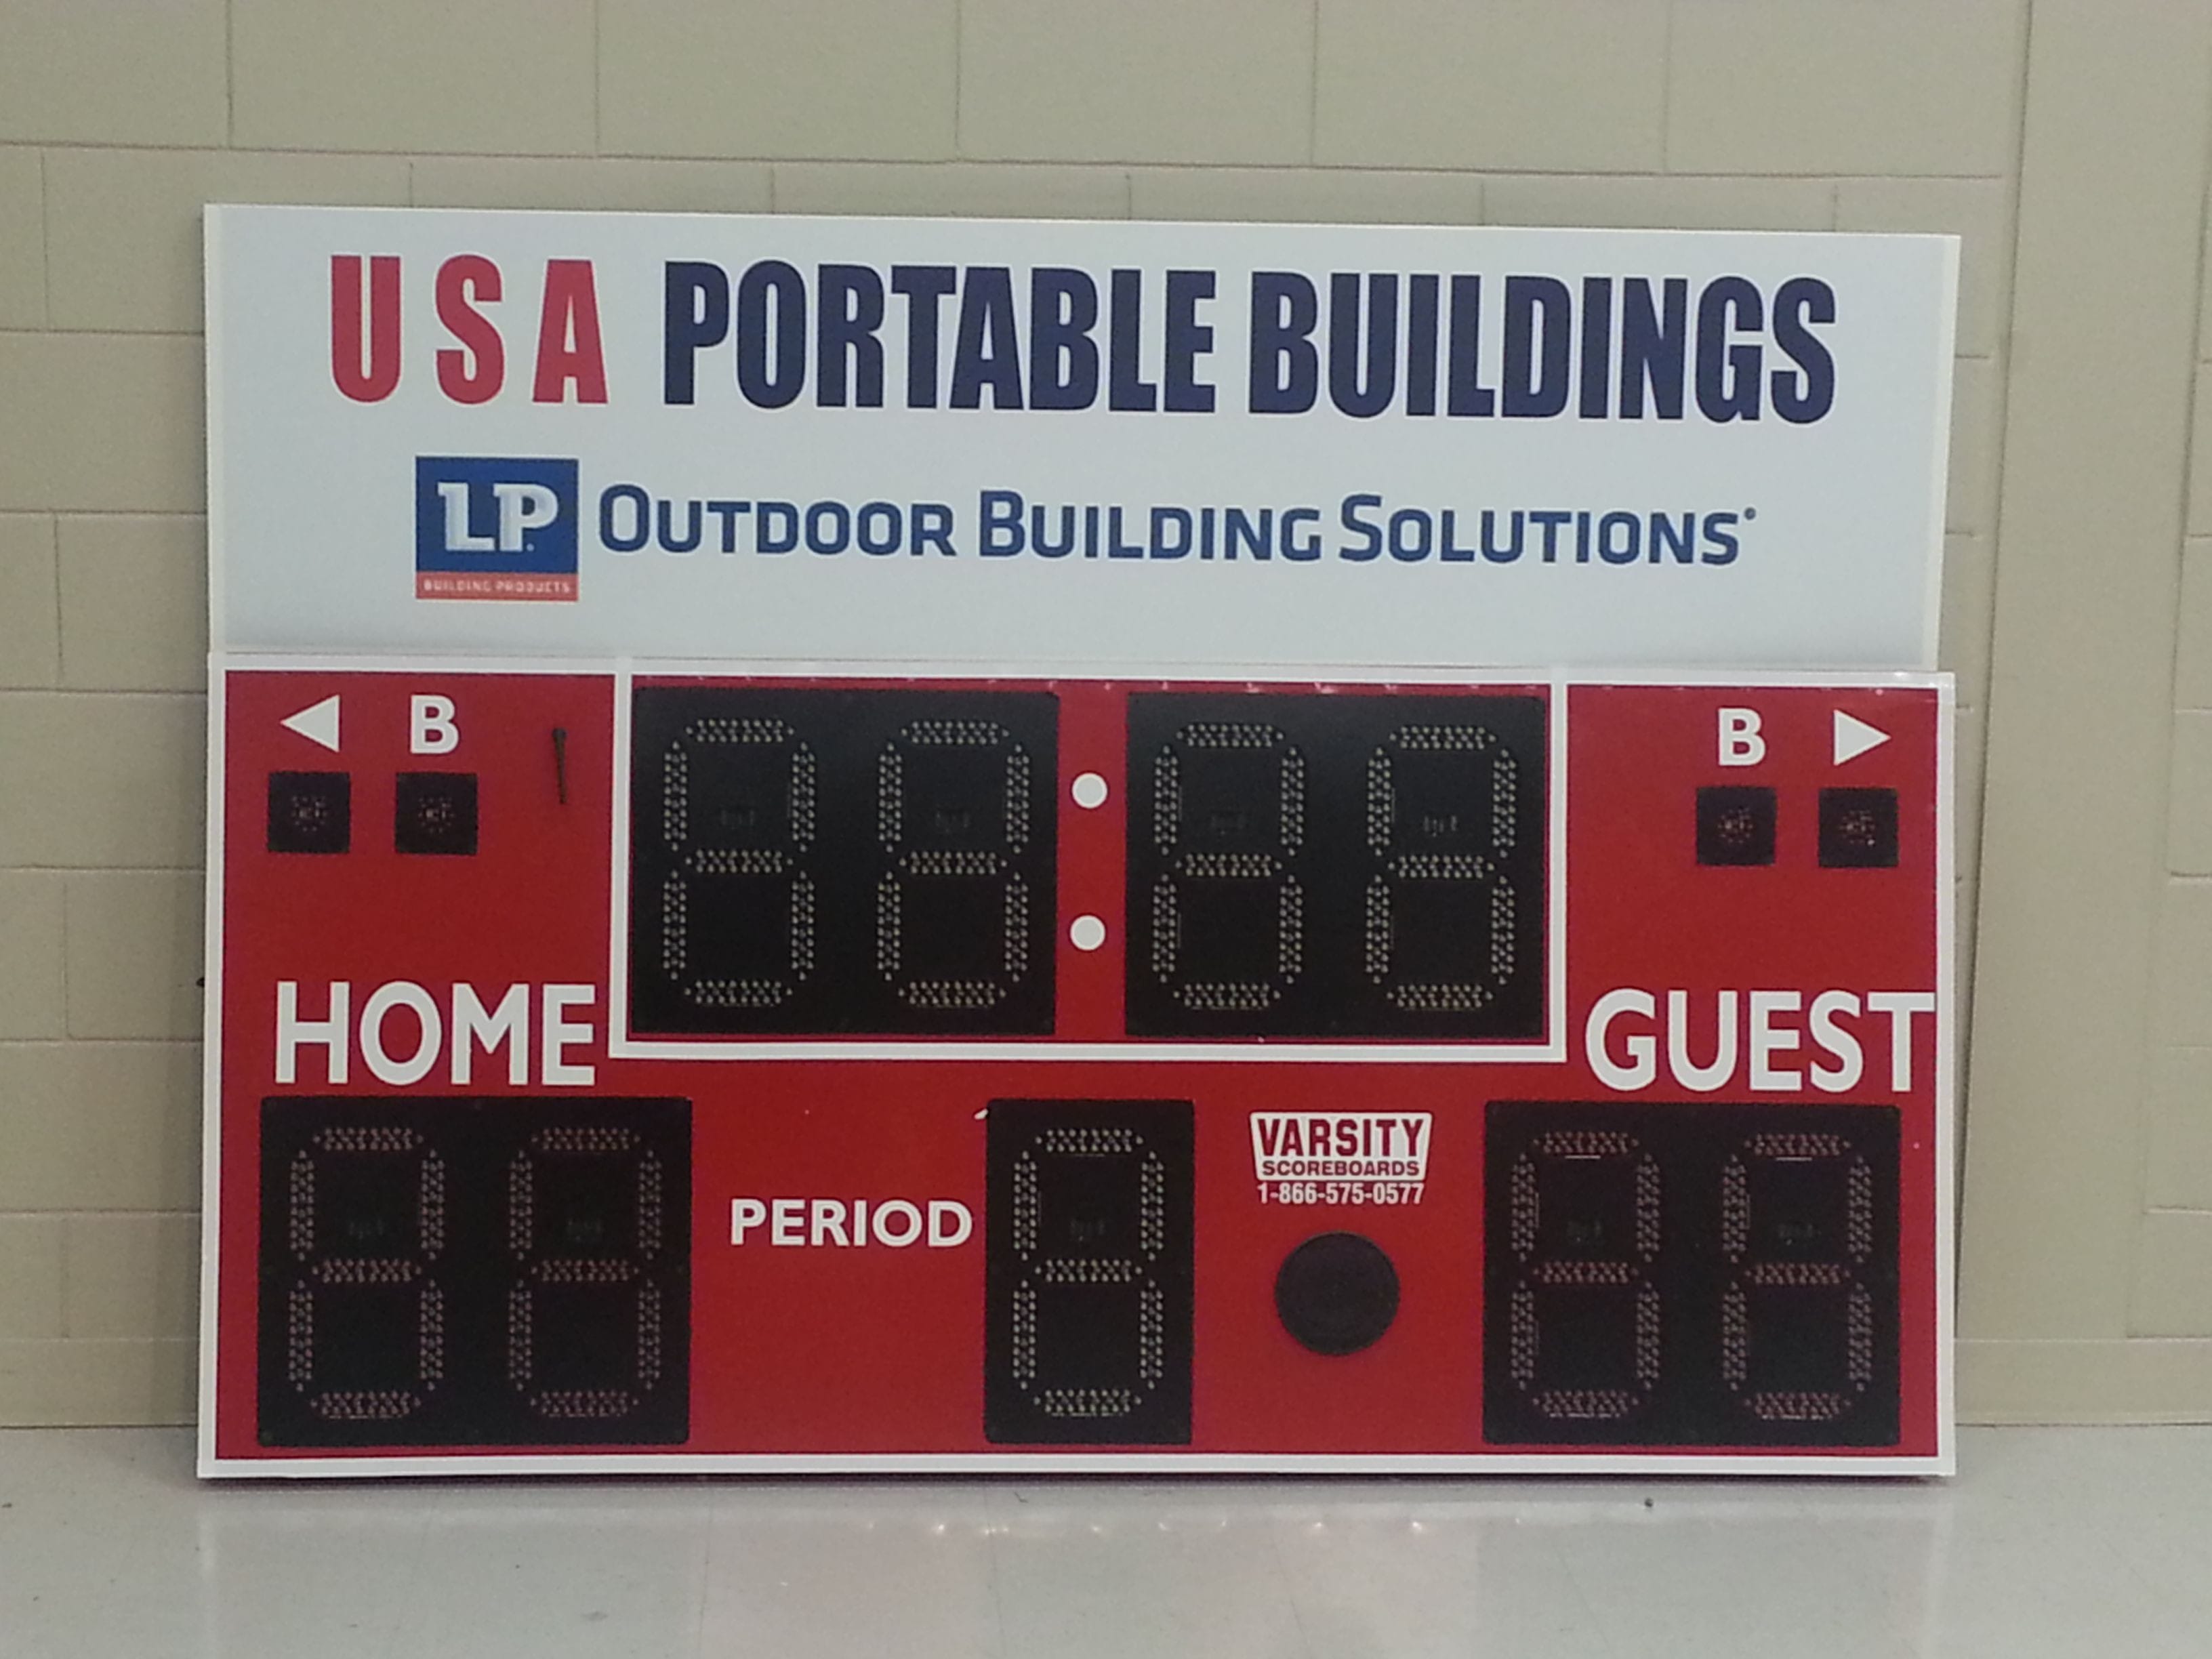 Score Board donated to Roby Elementary 